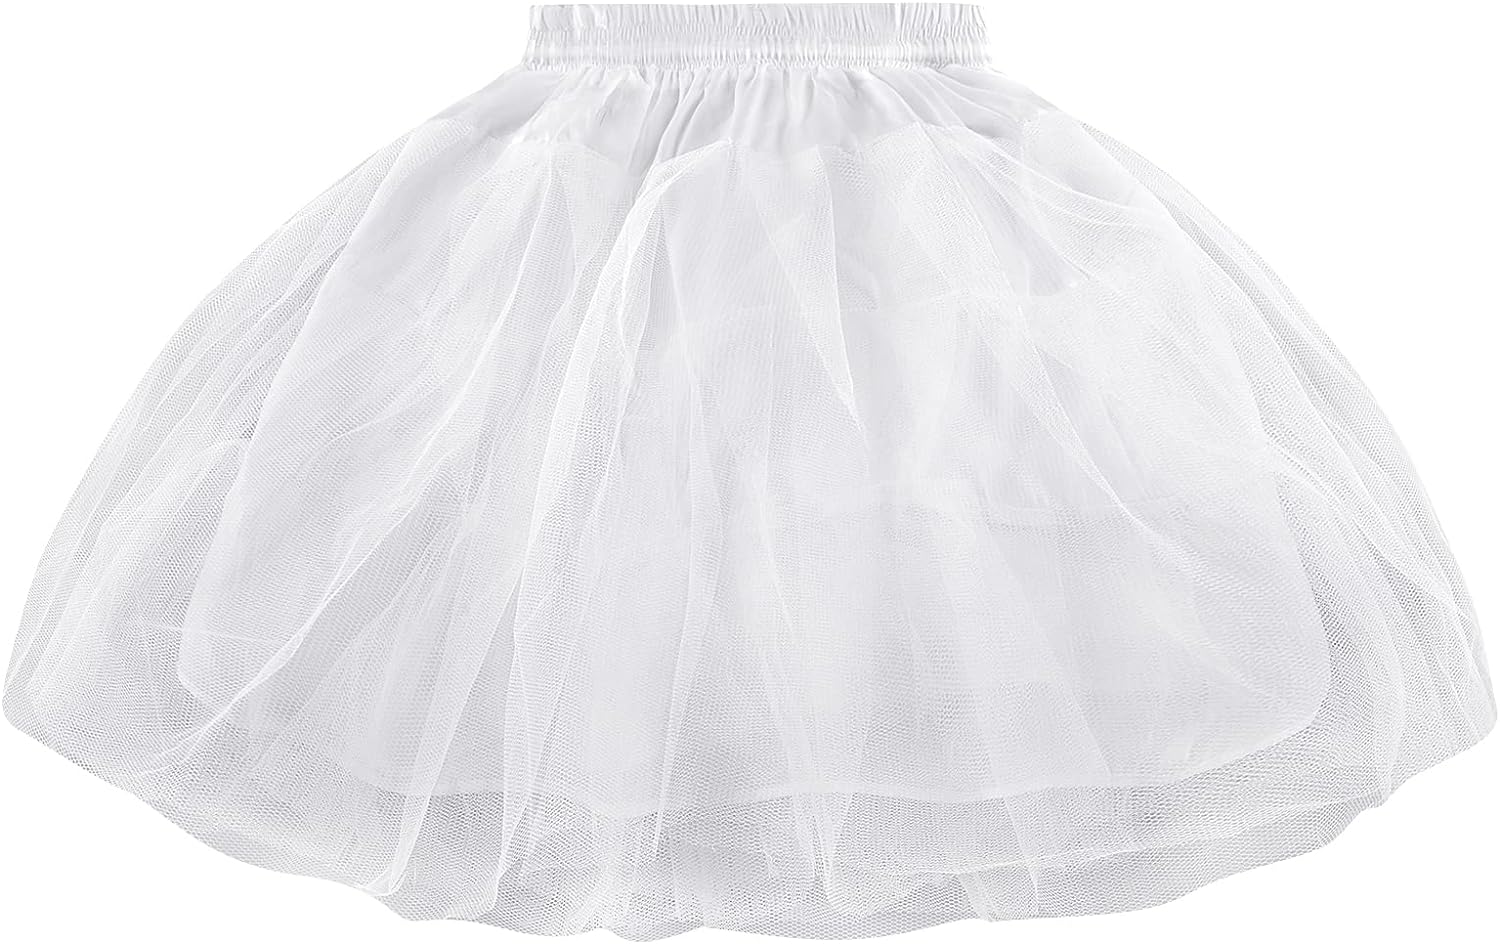 Sew A Magical Wardrobe Staple: Free Tulle Underskirt Pattern For Girls